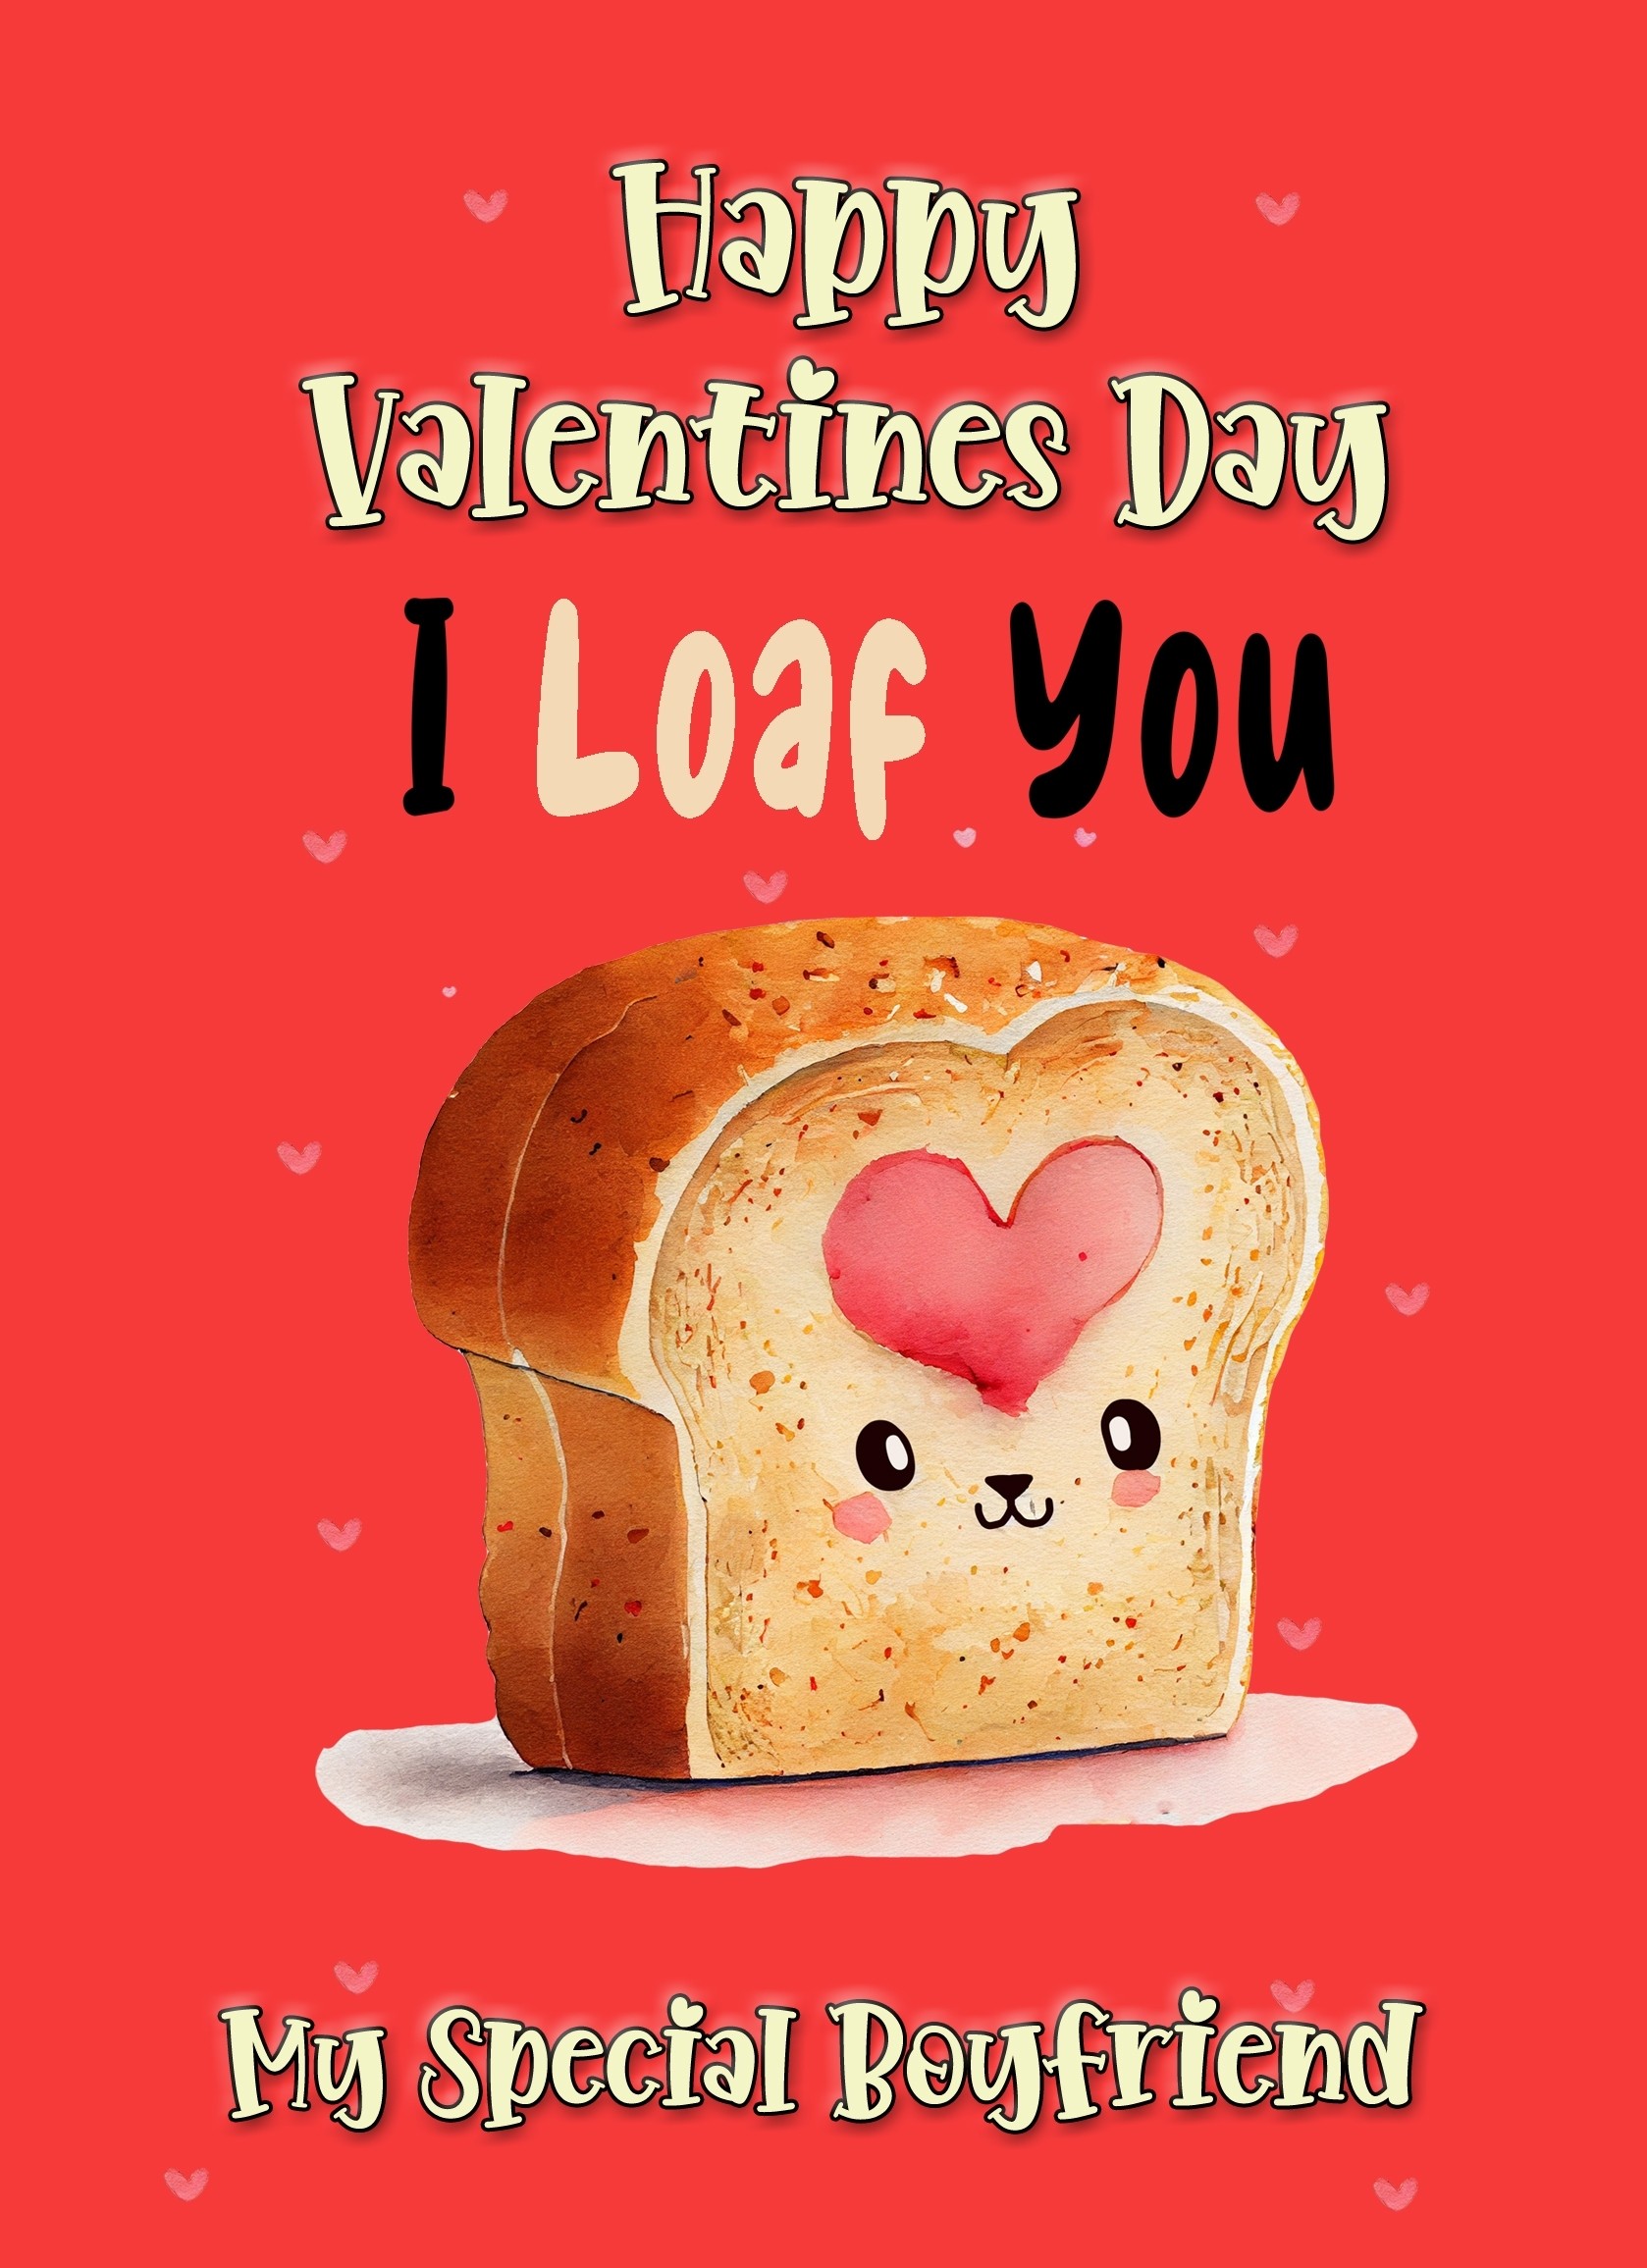 Funny Pun Valentines Day Card for Boyfriend (Loaf You)